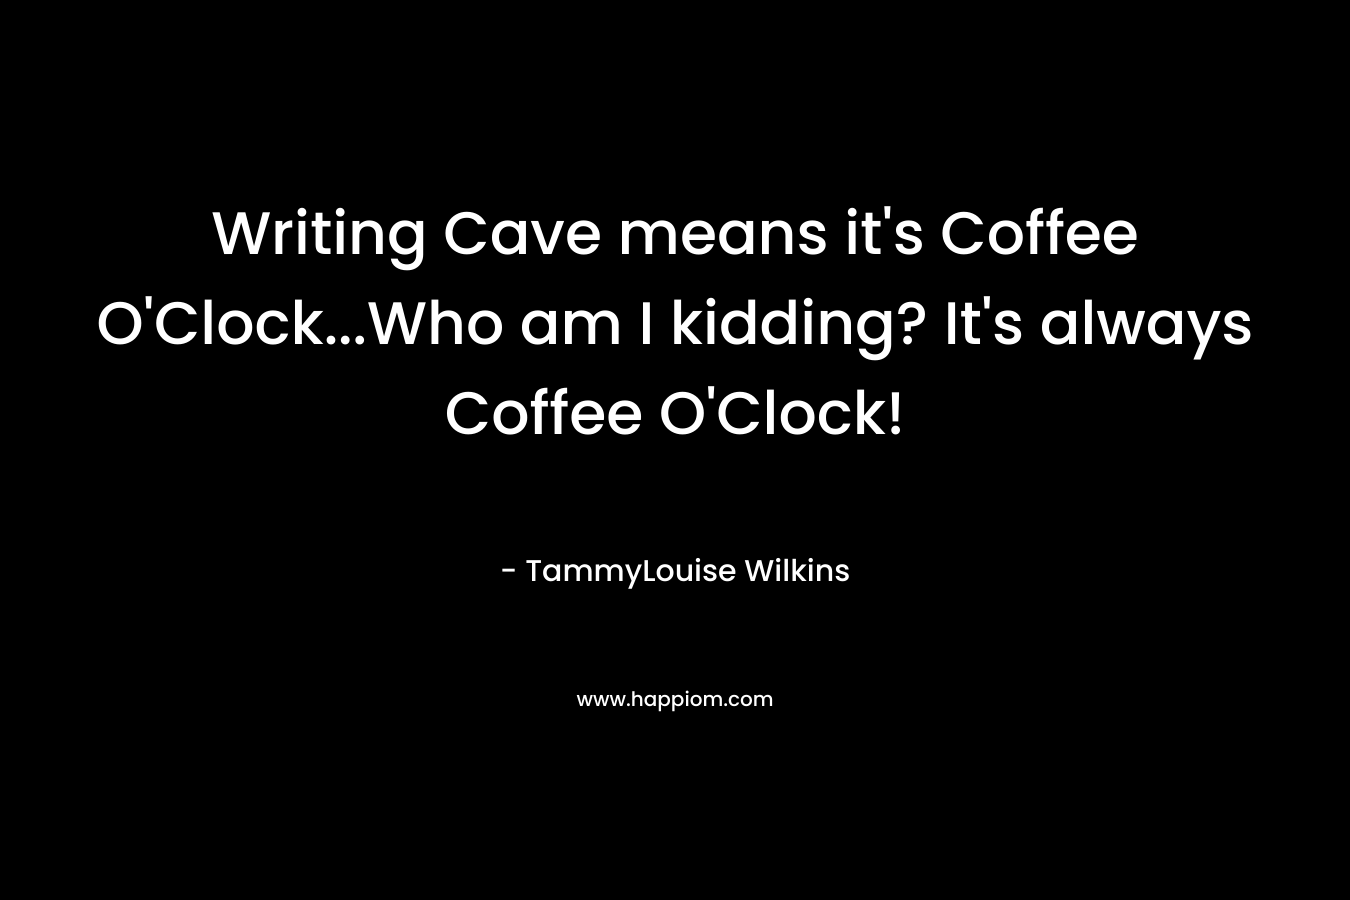 Writing Cave means it's Coffee O'Clock...Who am I kidding? It's always Coffee O'Clock!